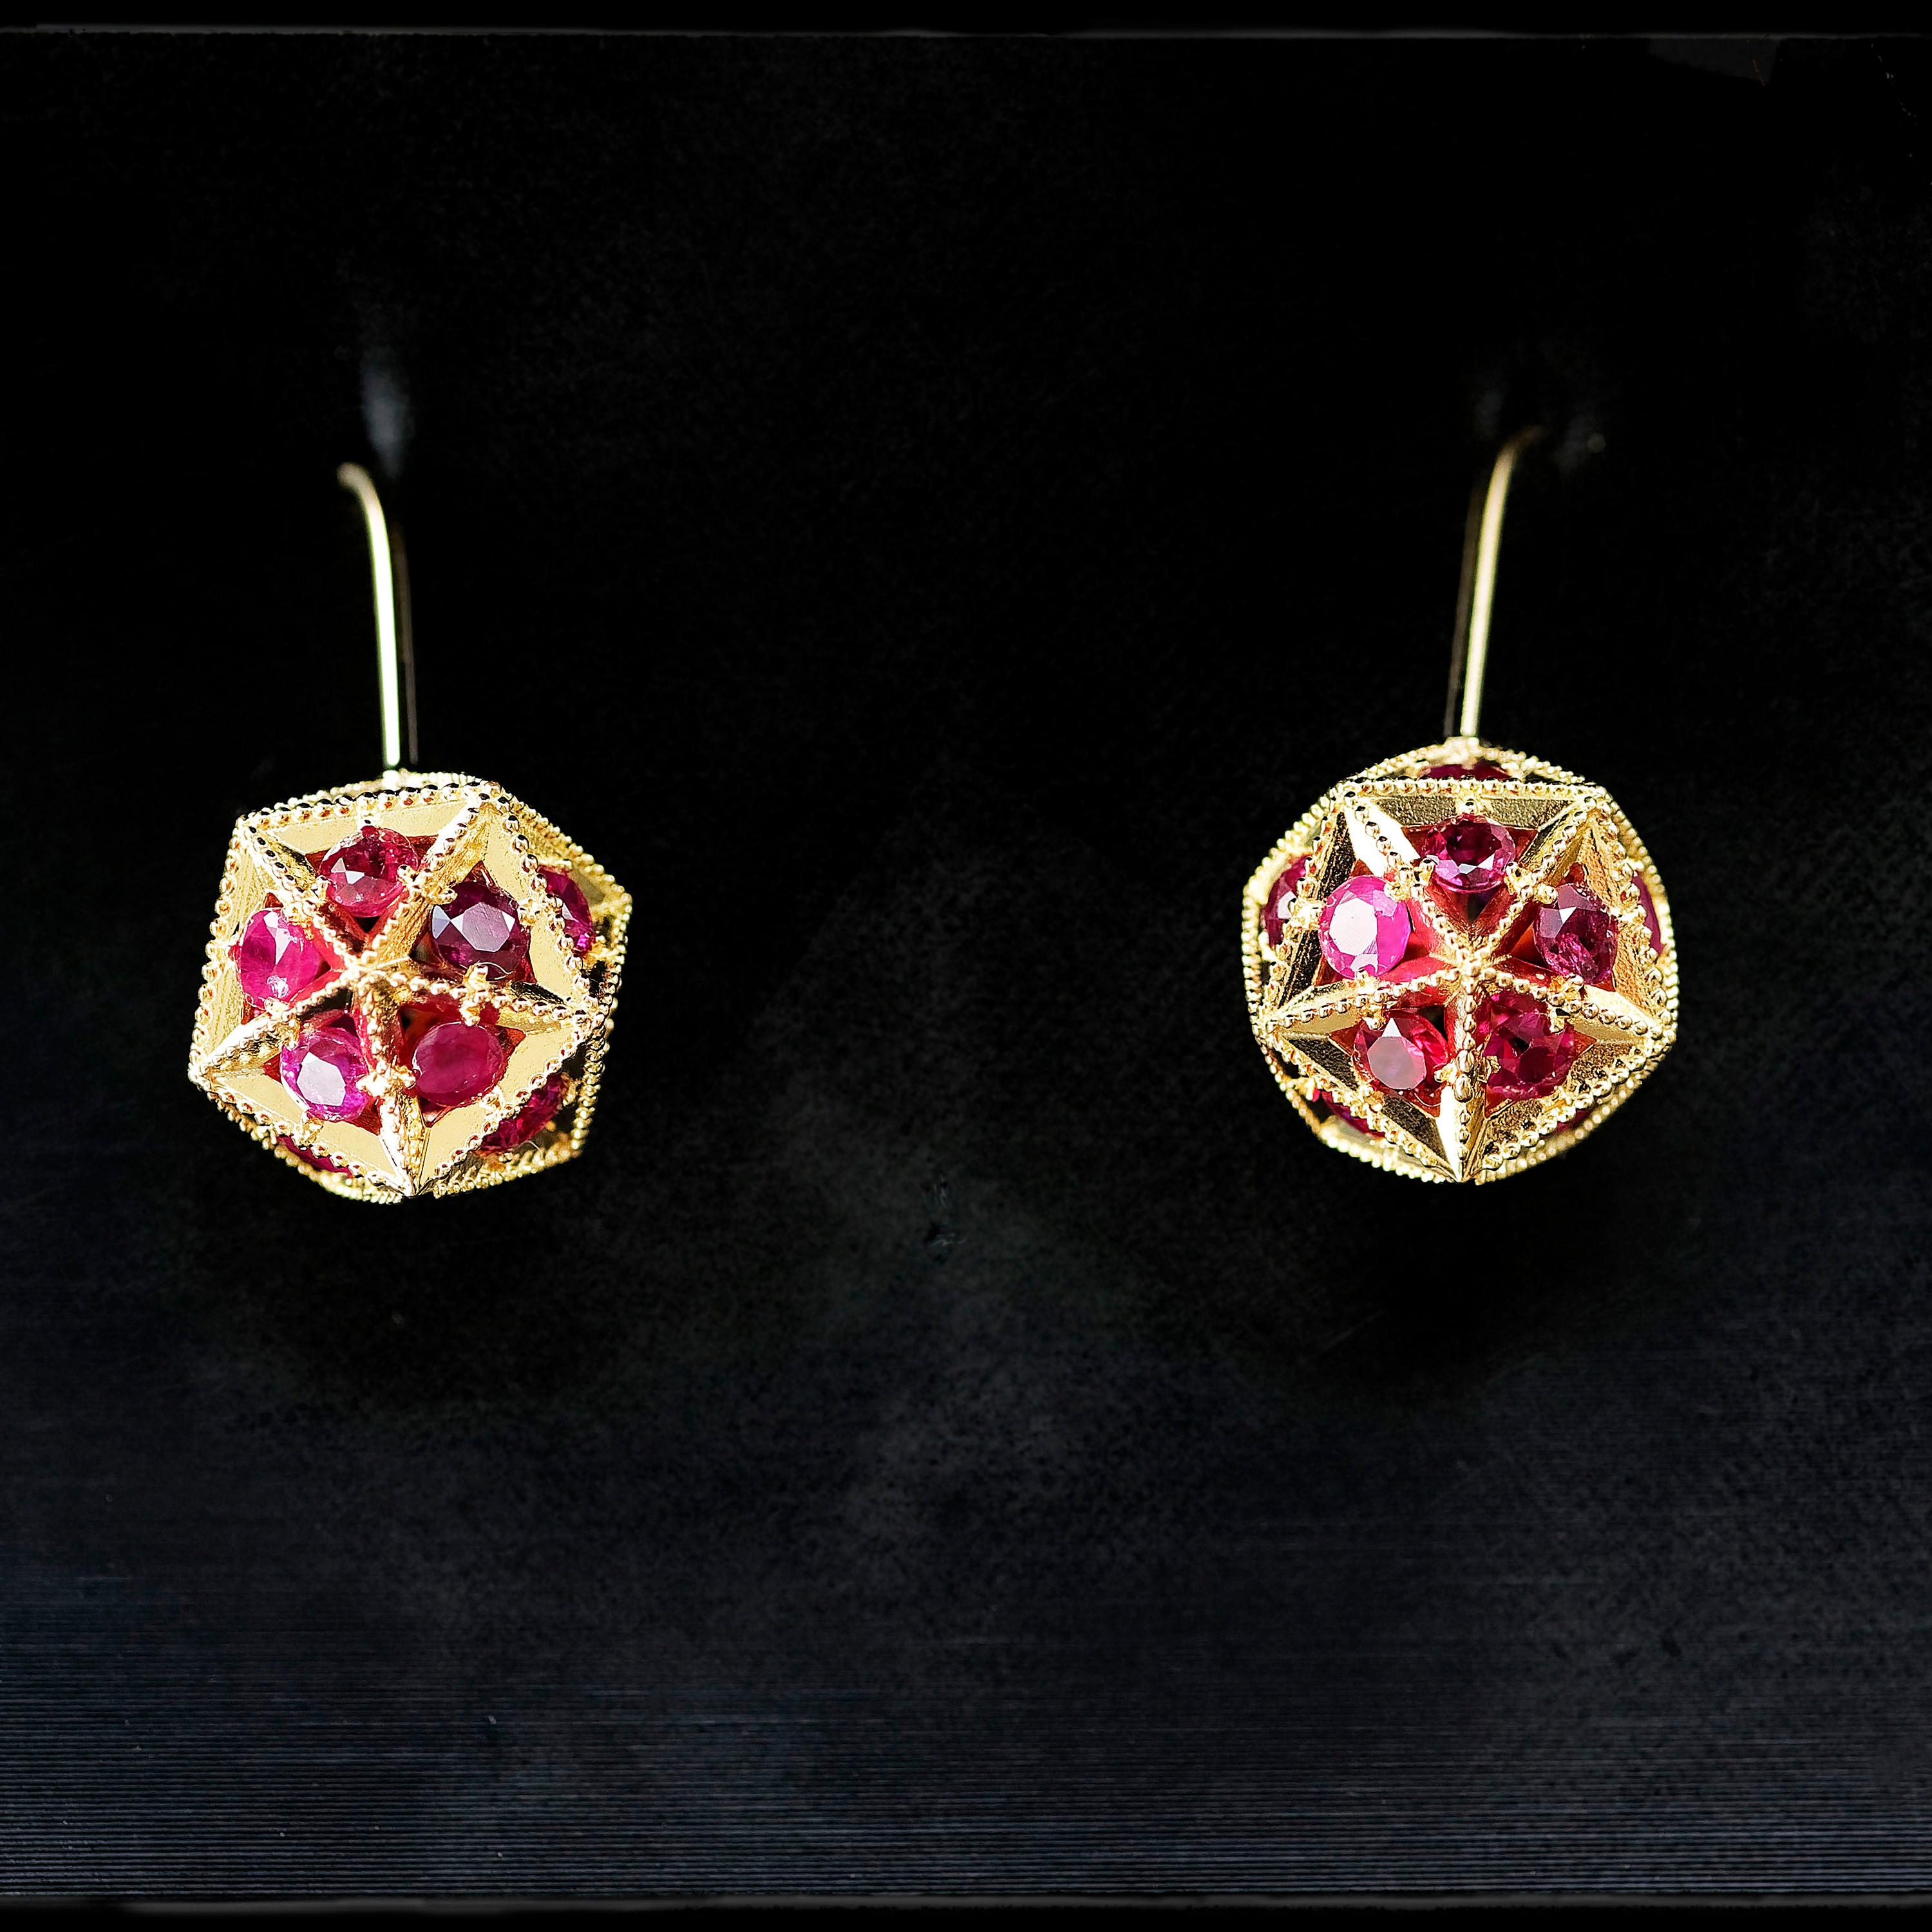 These drop earrings in 18K gold are set with perfectly faceted and clear rubies in a pleasing geometric arrangement. A touch of colour and warmth makes them suitable for everyday luxurious wear. Up close, they resemble floating lights from distant